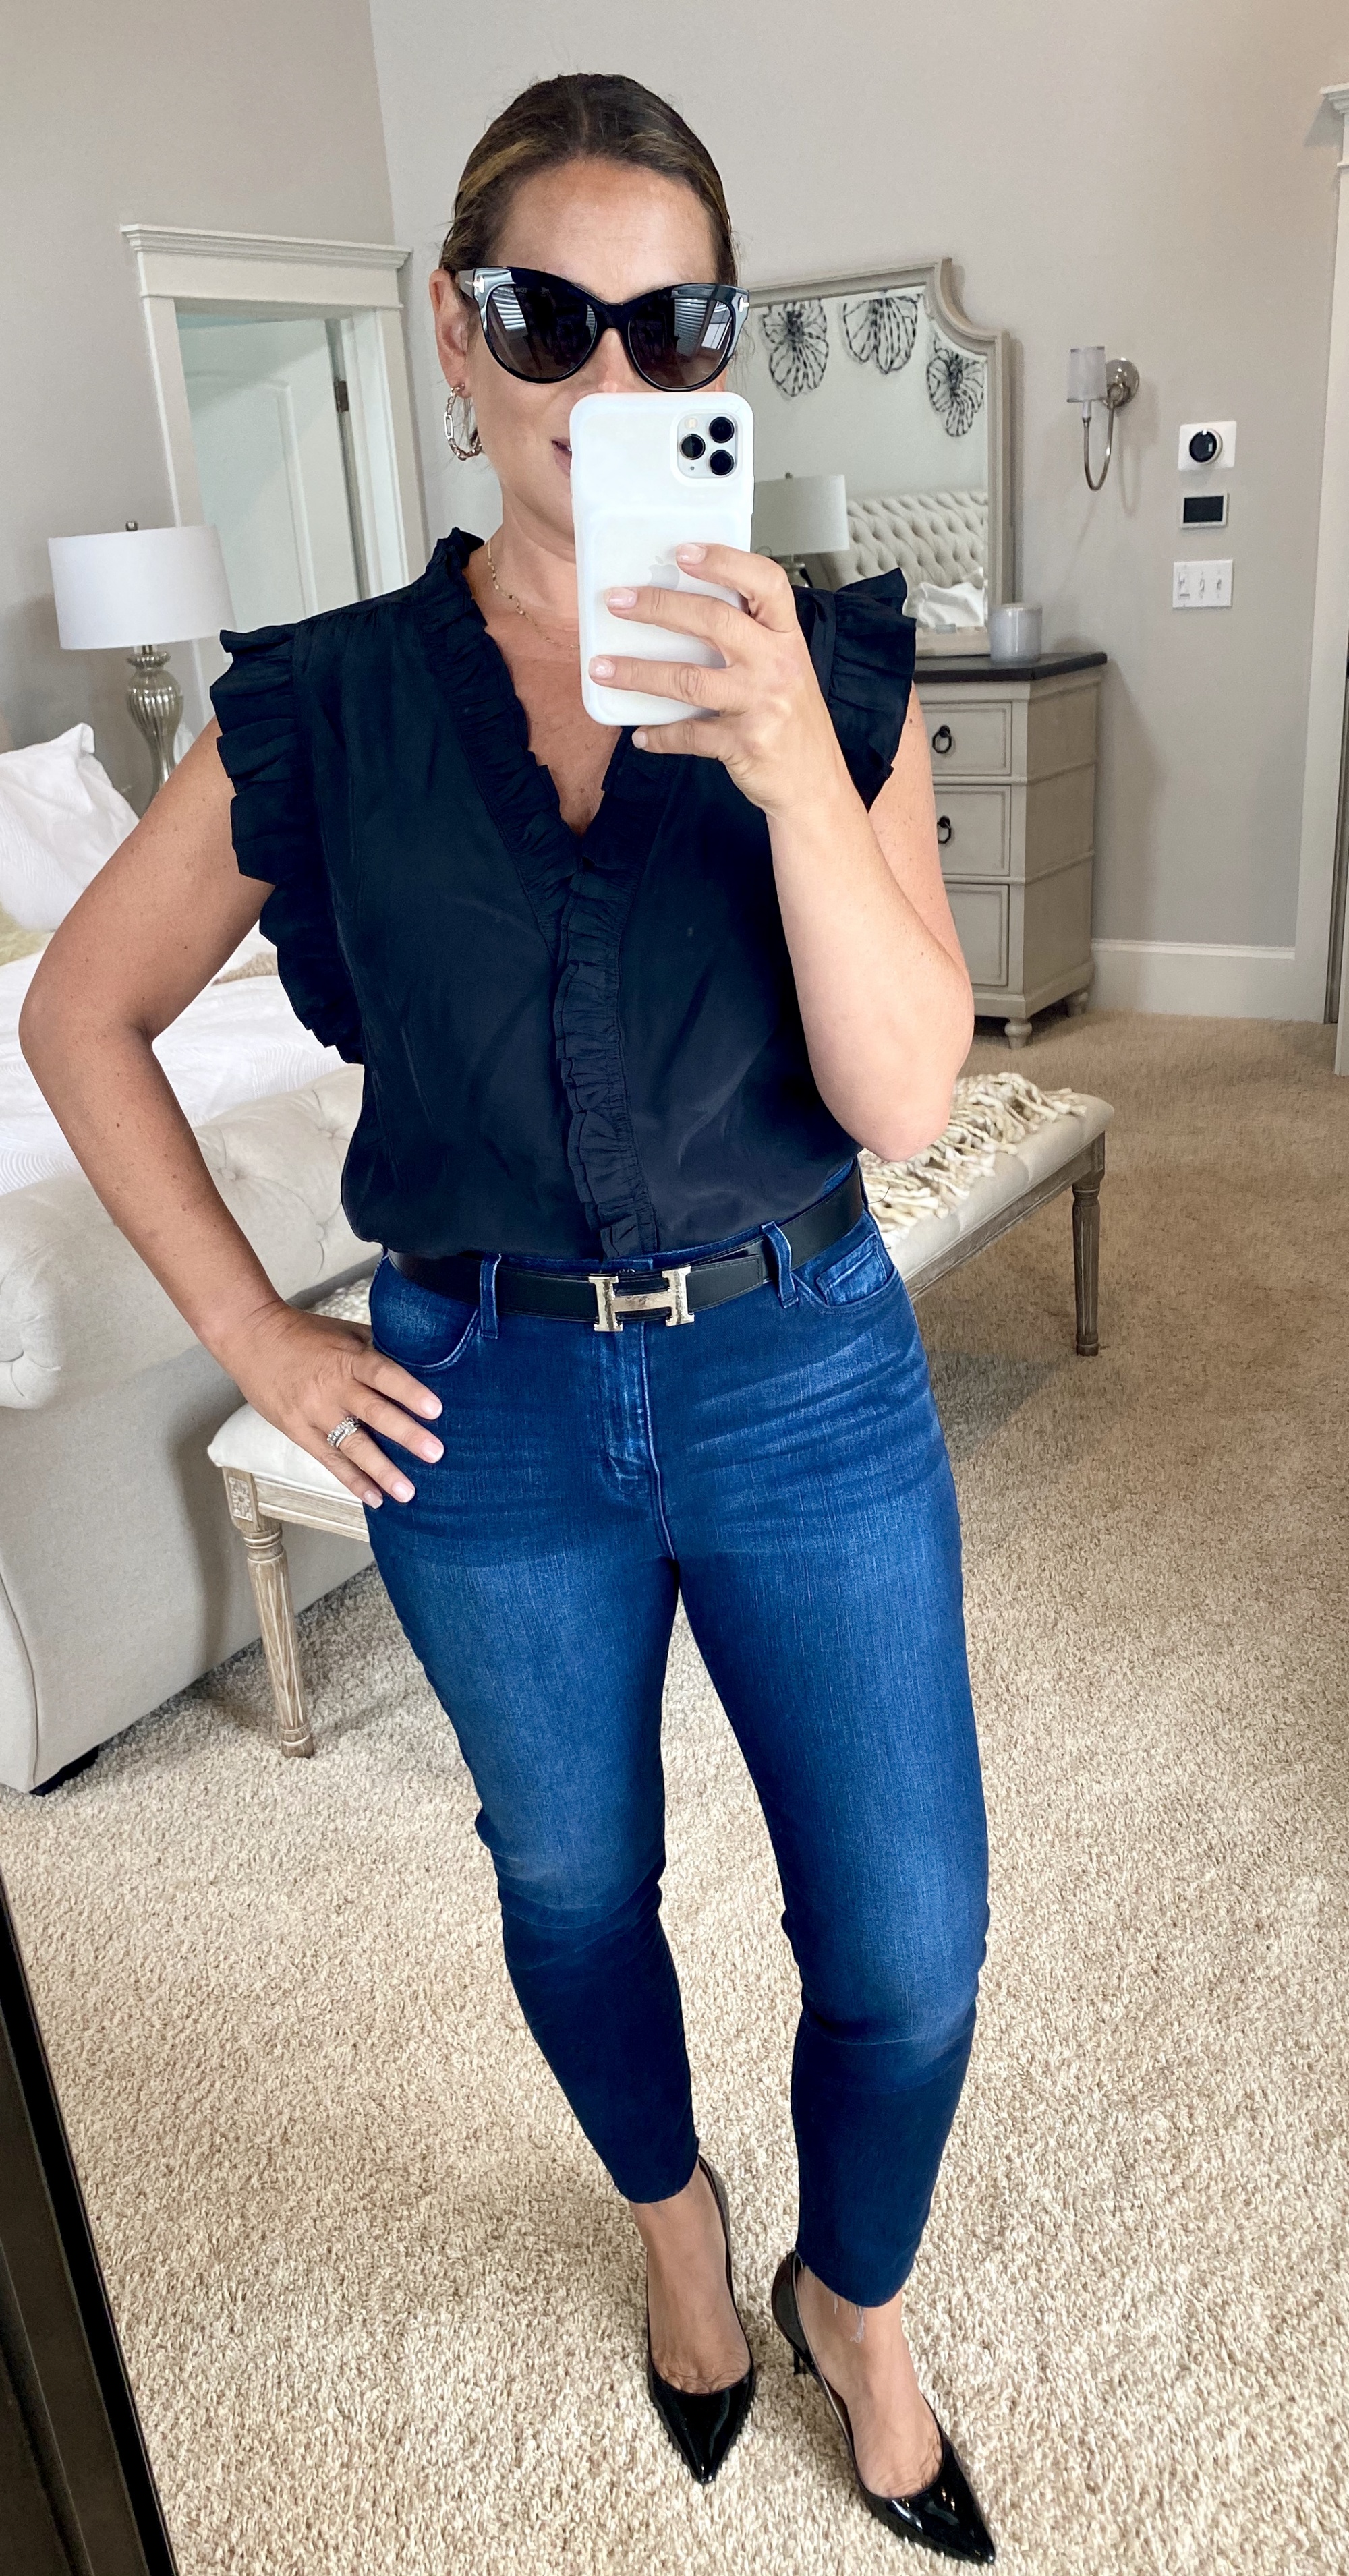 Nordstrom Sale Favorites, Hive Community Manager Denise Wearing A Black Ruffle Sleeve Frame Blouse With Skinny Jeans And Pumps